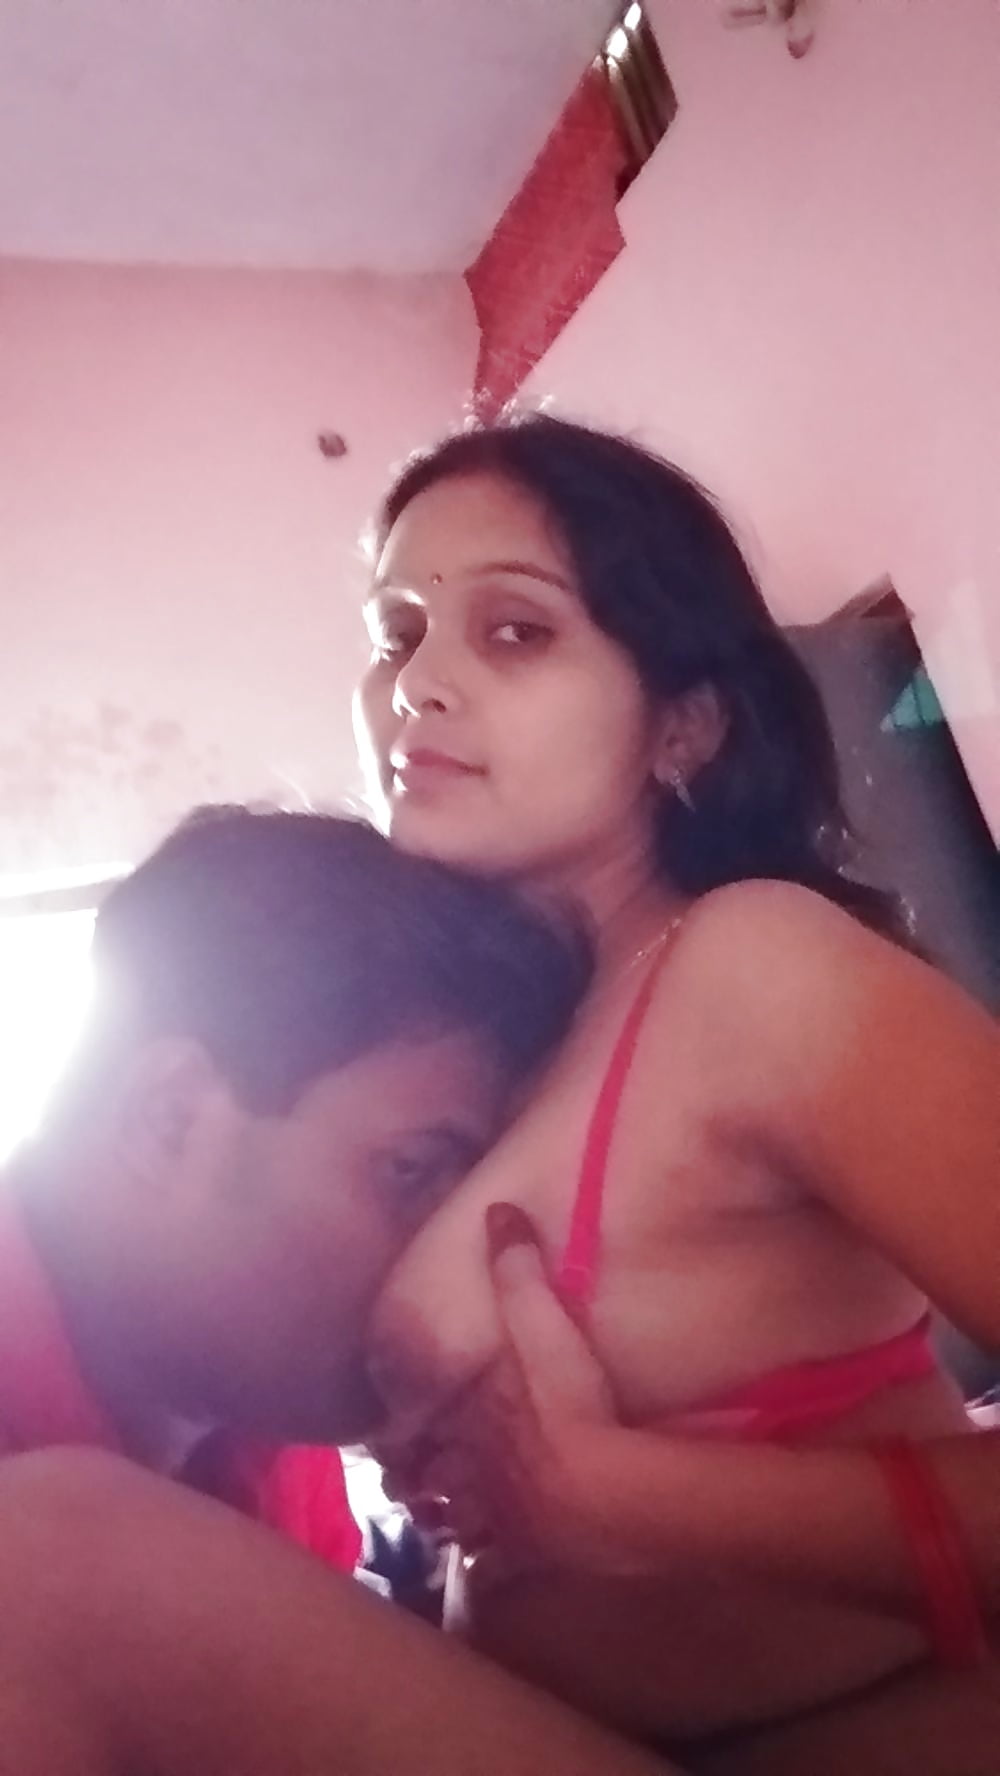 Indian wife nude sex photos with her secret lover pic